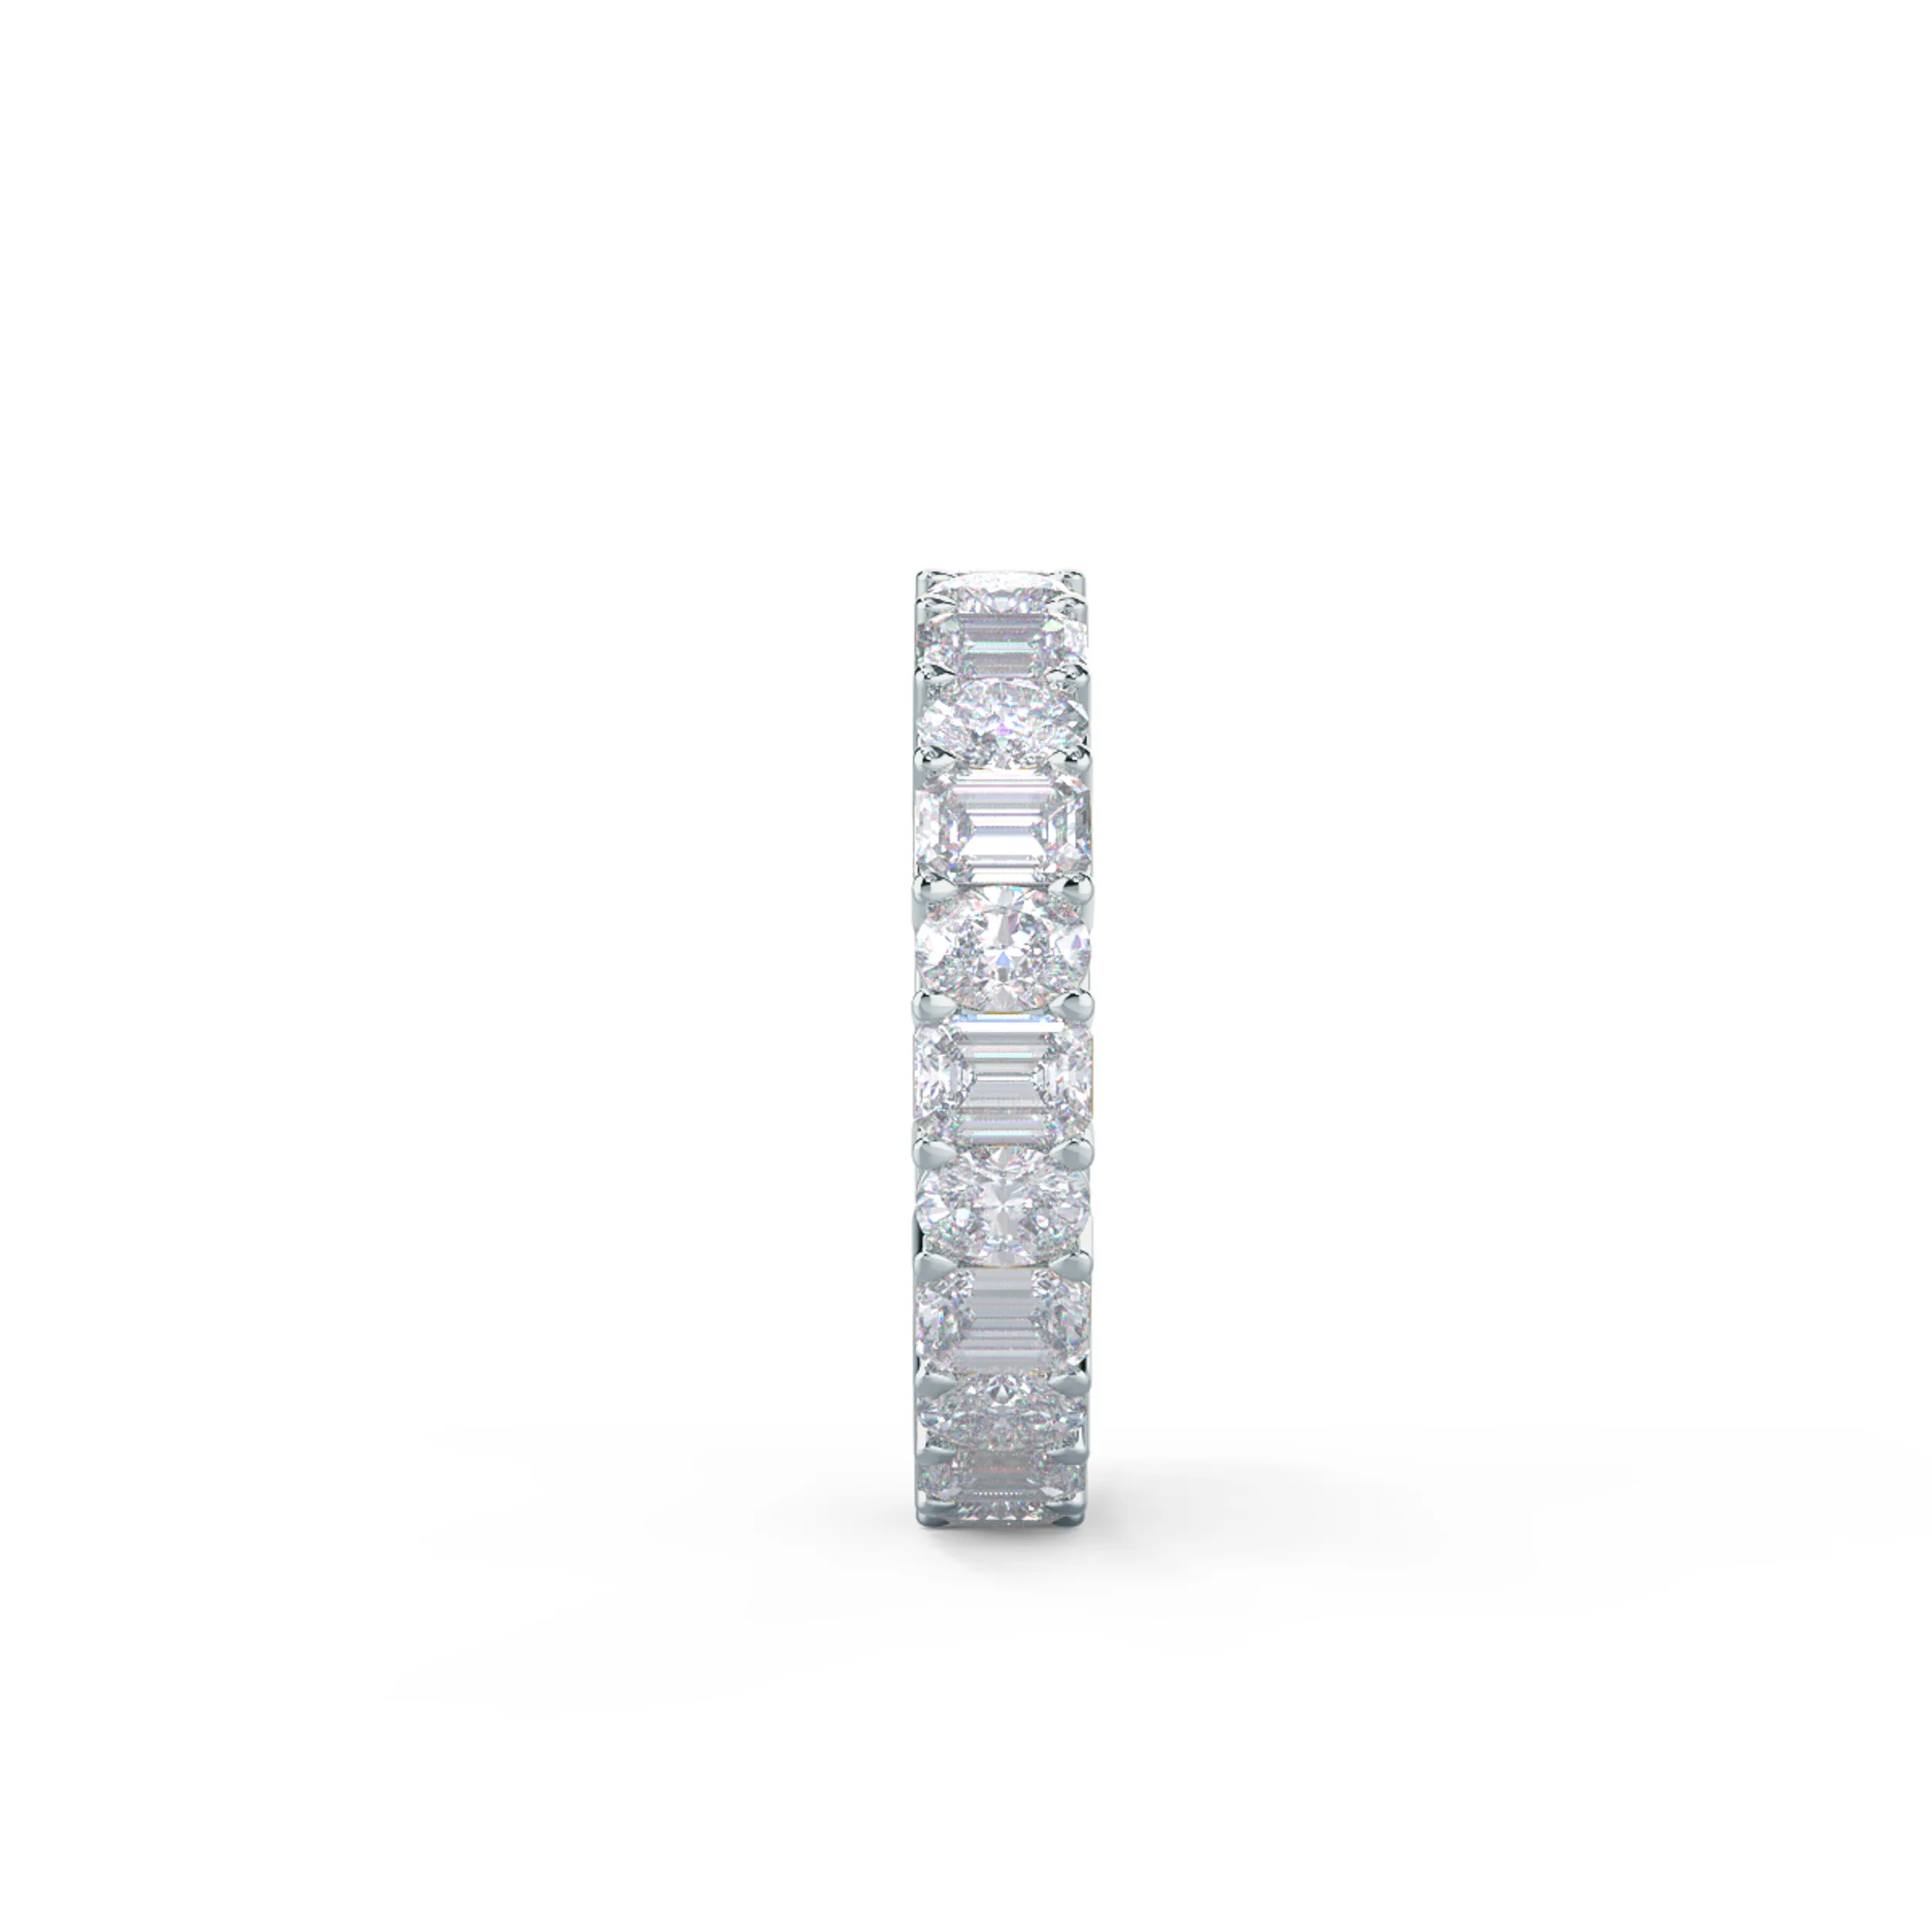 5.5 Carat Lab Diamonds Emerald and Oval Diamond Eternity Band in 18k White Gold (Side View)